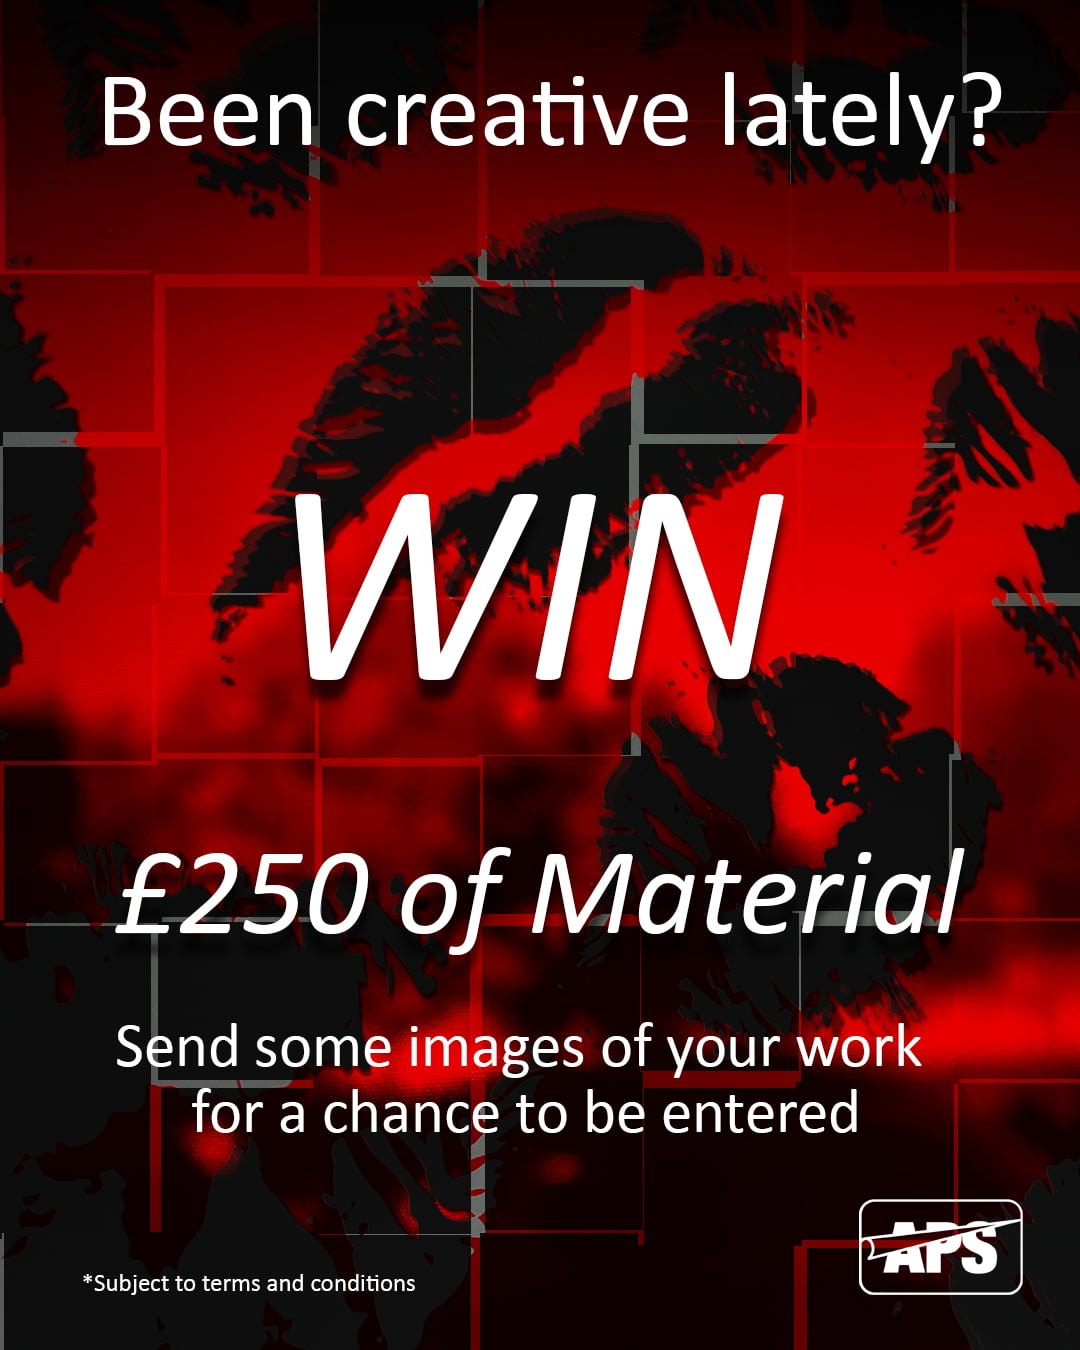 Win £250 of materials from All Print Supplies - competition to send APS images of your best work for entry!